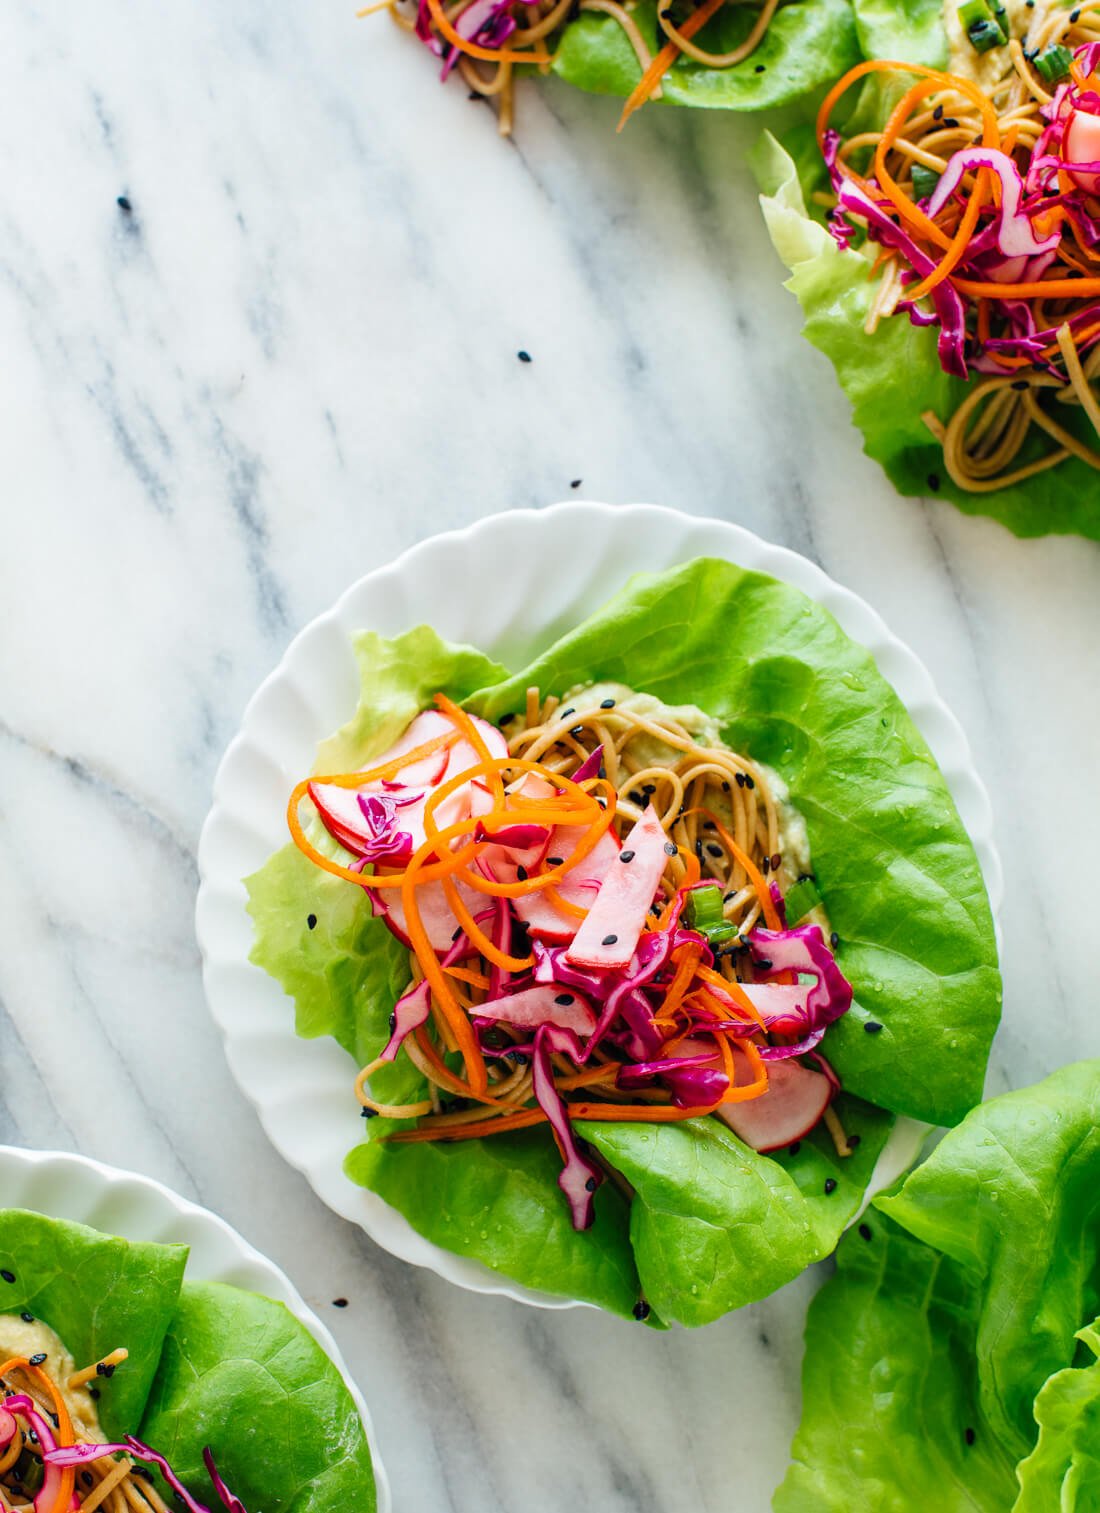 These healthy lettuce wraps are colorful, fun to eat, and so delicious!  They are vegetarian/vegan and easily gluten free.  Get the recipe at cookieandkate.com